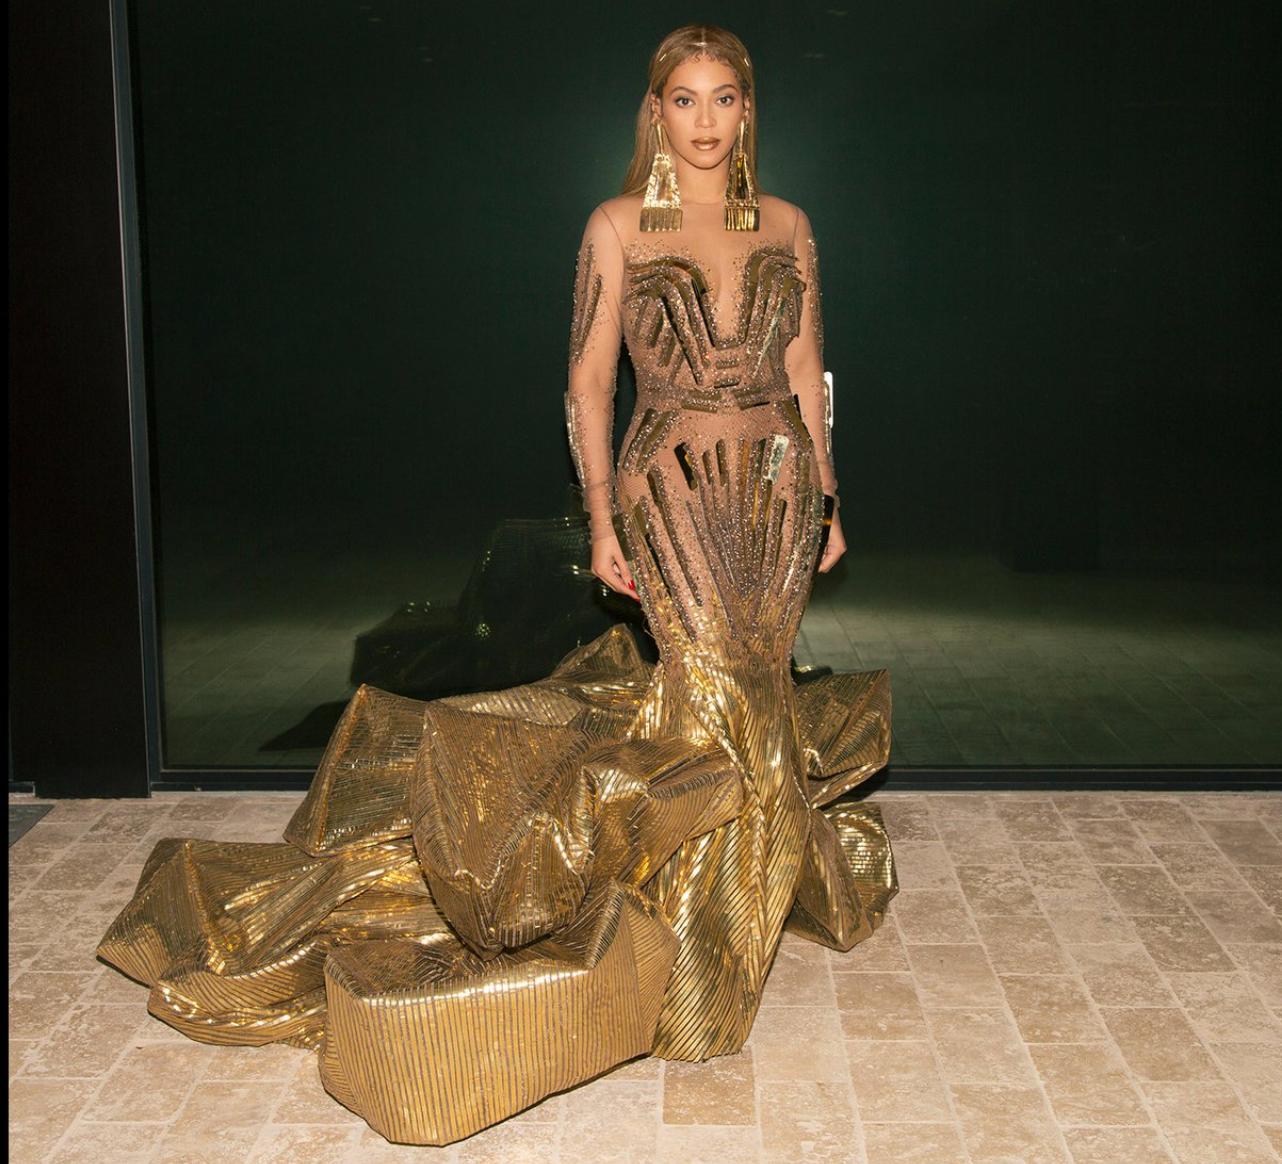 Beyonce, Blue Ivy And All The Fabulous Guests At The 2018 Wearable Art Gala
